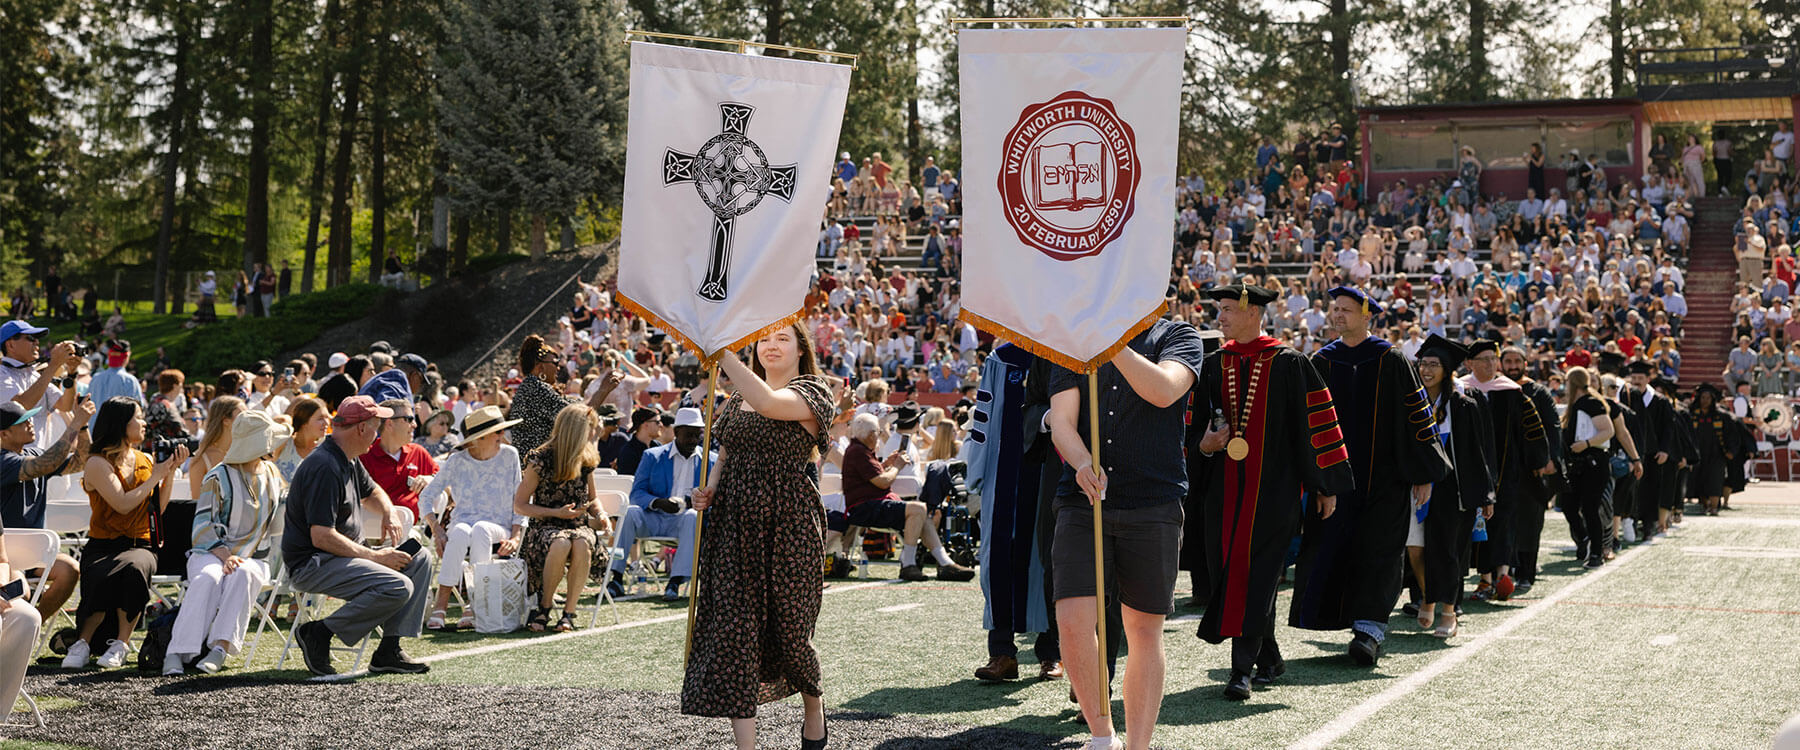 A large group of people in academic regalia participate in a ceremonial procession, holding banners with symbols.